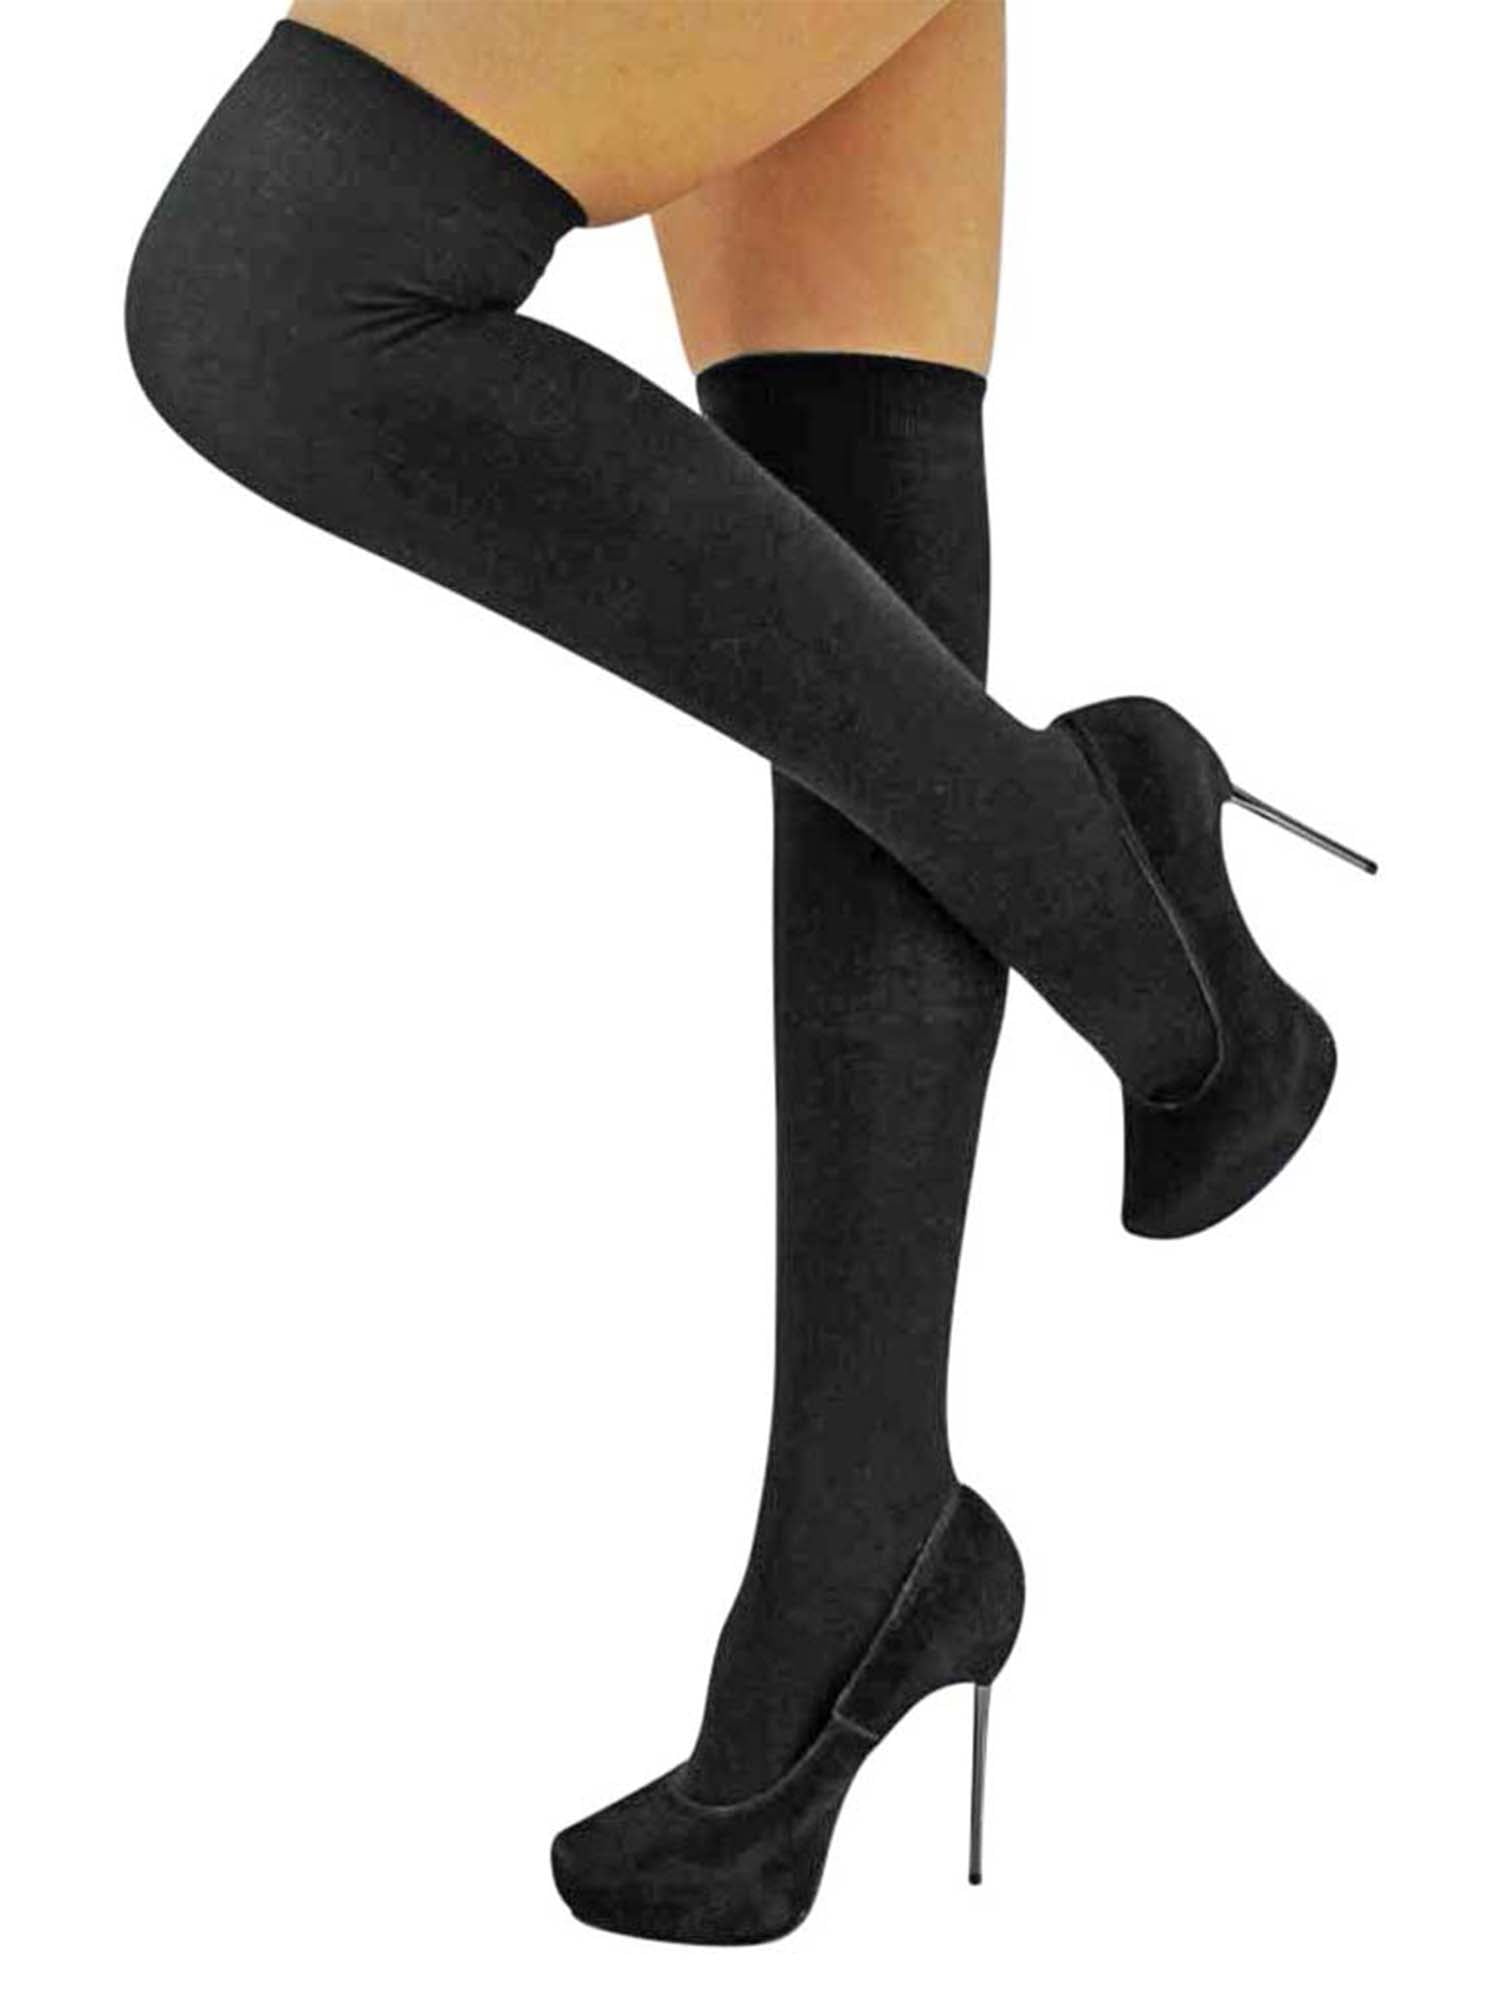 LADIES OVER THE KNEE SOCKS STOCKINGS THIGH HIGH WITH STRIPES HOLD UP 